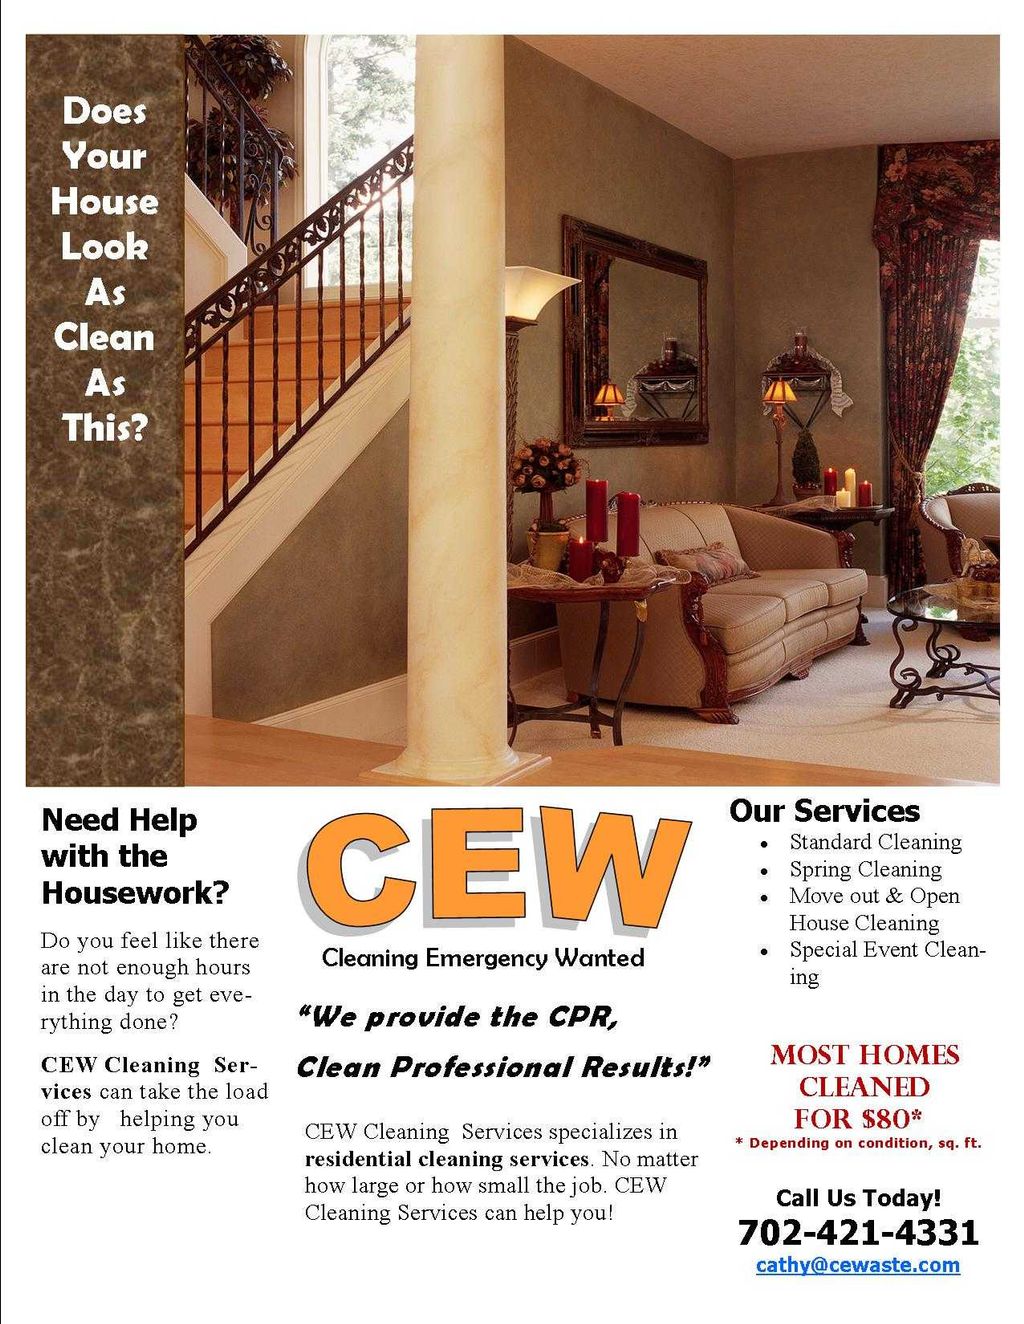 CEW Cleaning Services